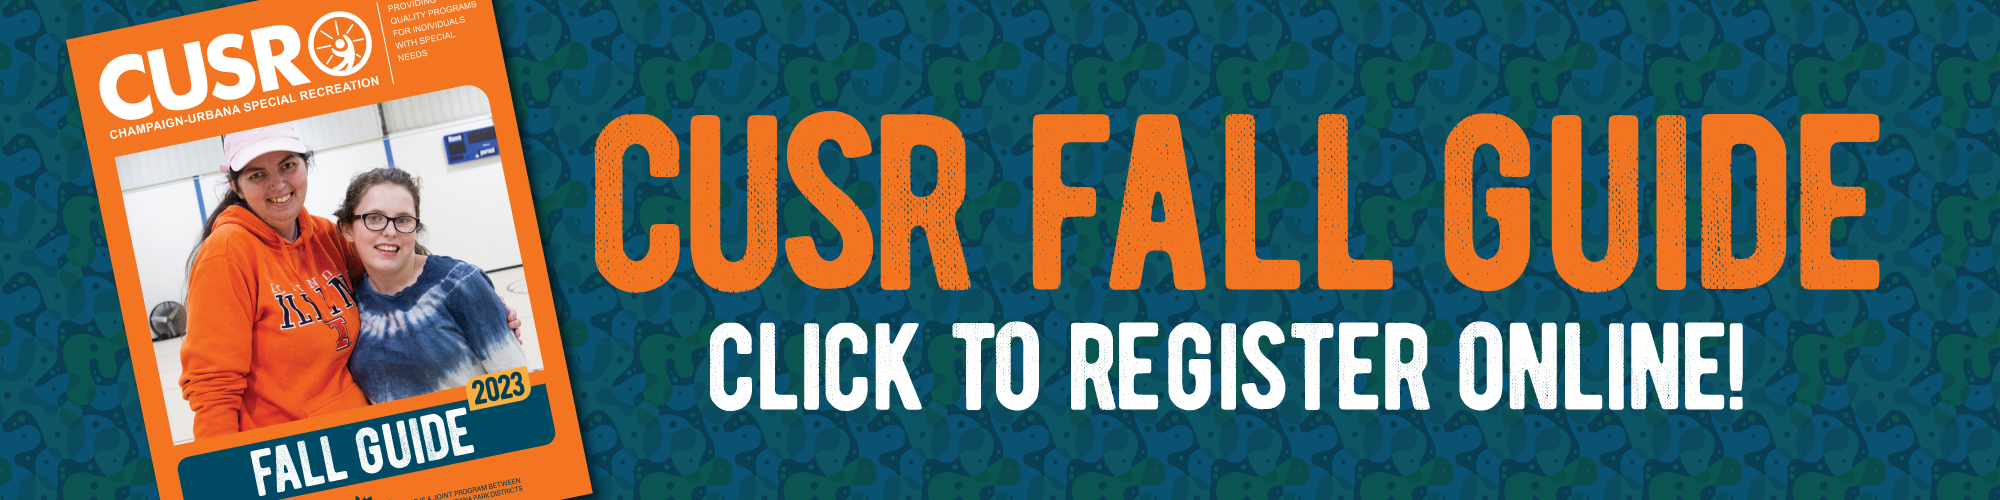 CUSR Fall Guide. Click to register!